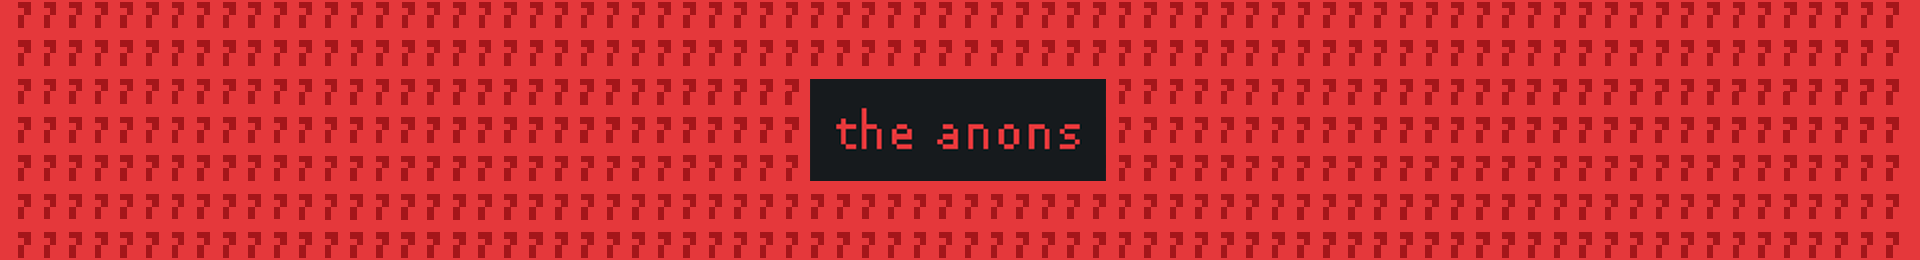 the anons banner